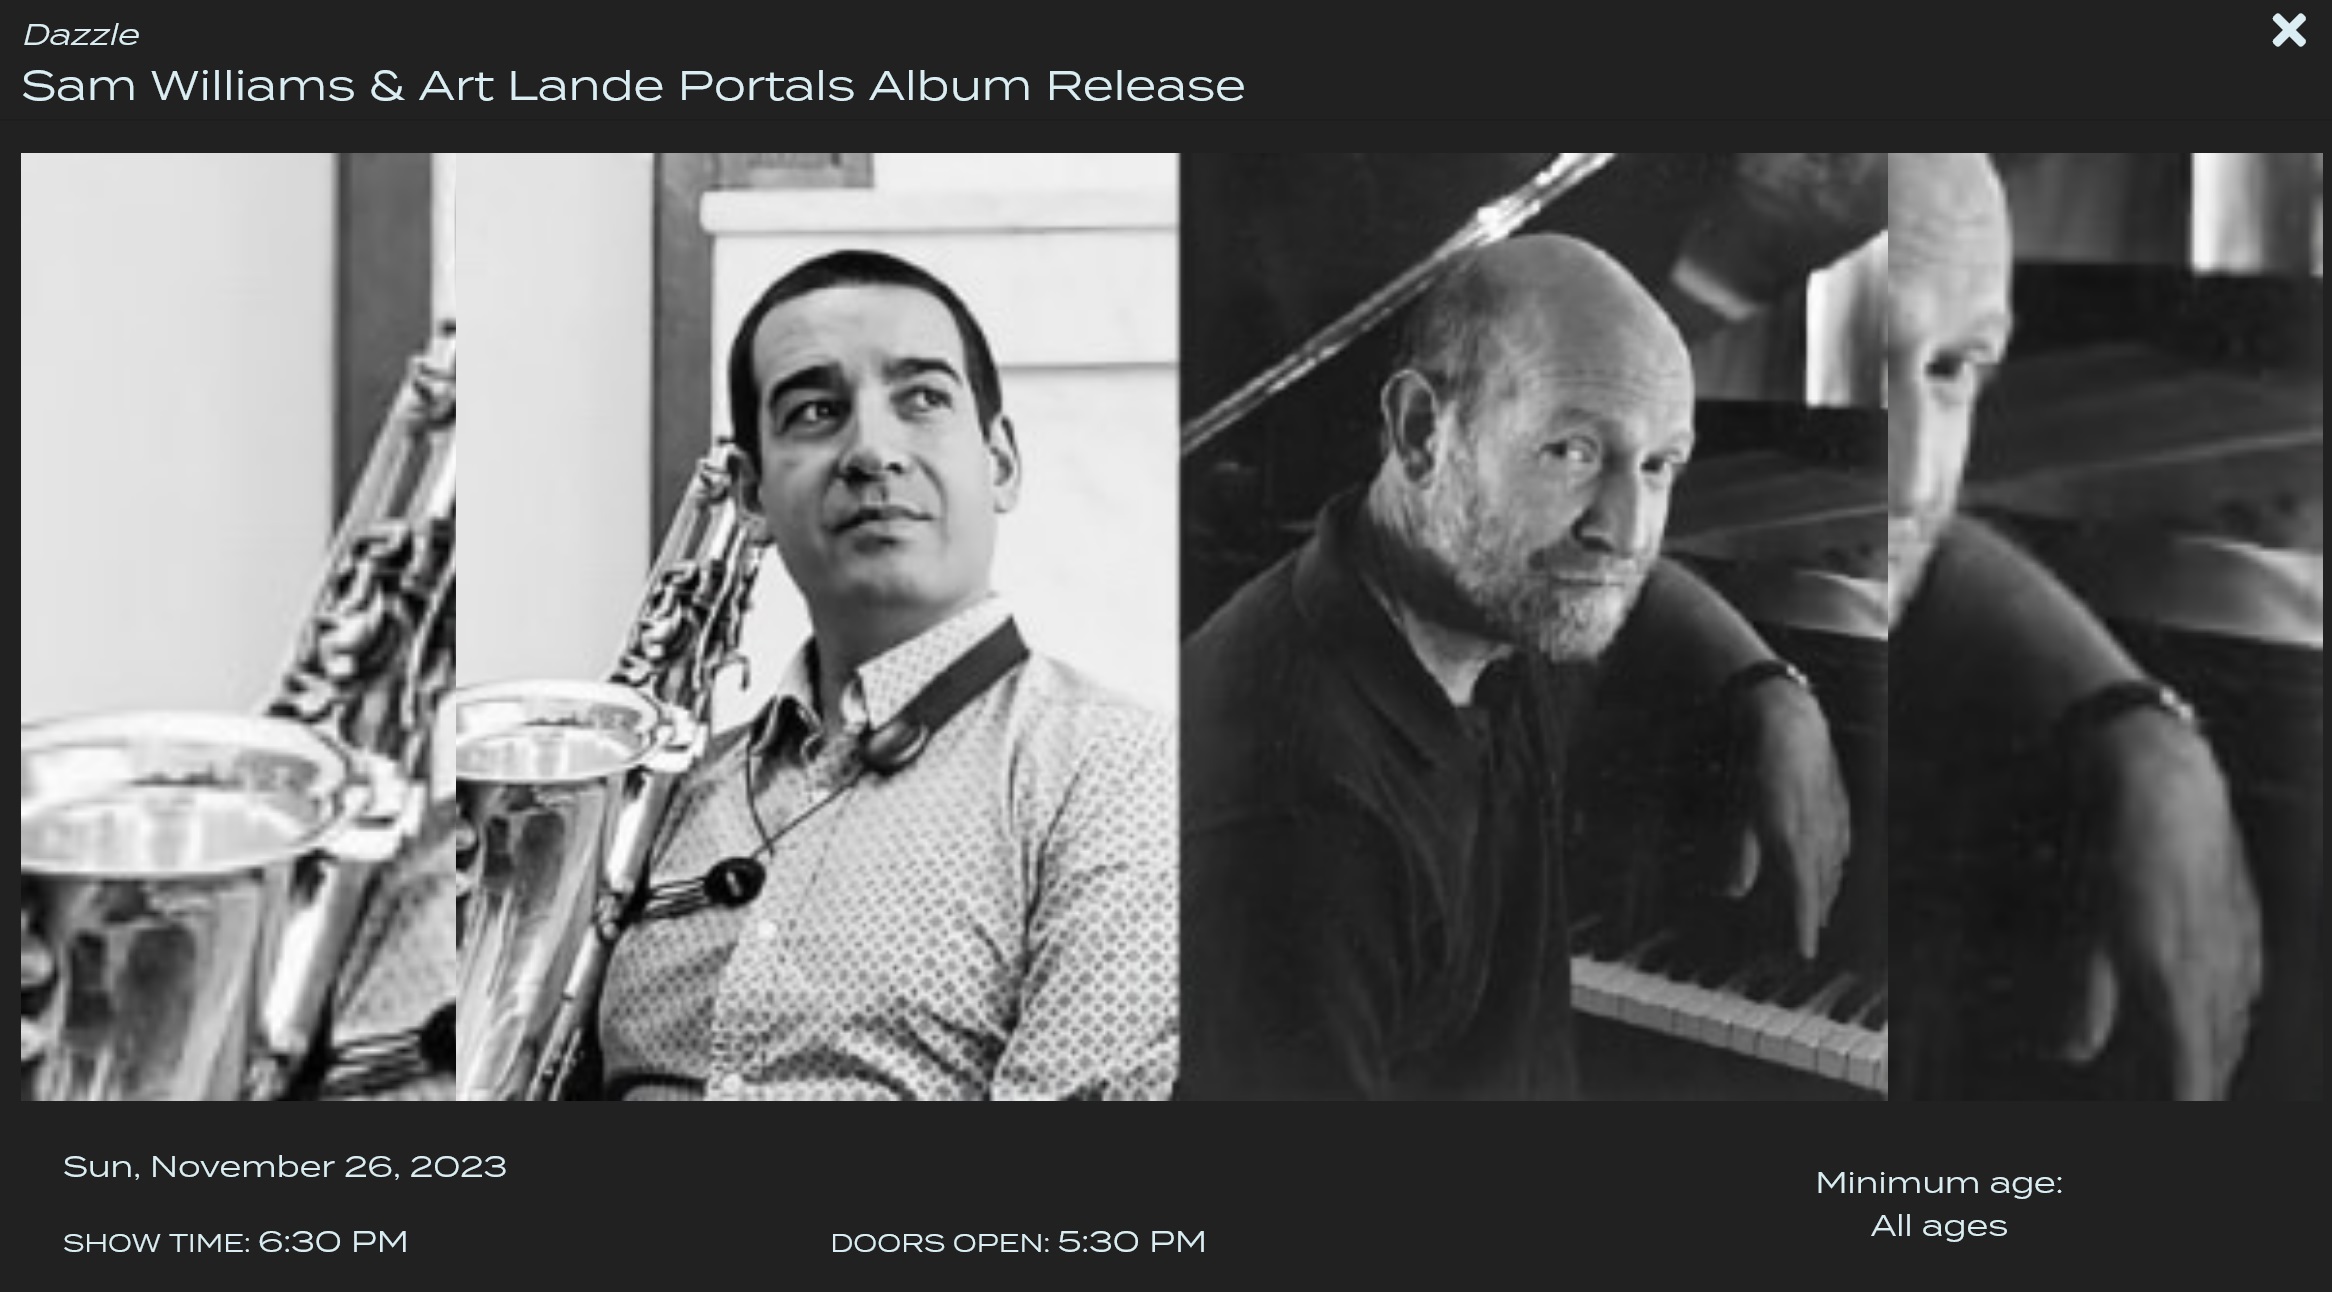 Art Lande and Sam Williams Celebrate "Portals" Album Release with a Special Concert at Dazzle